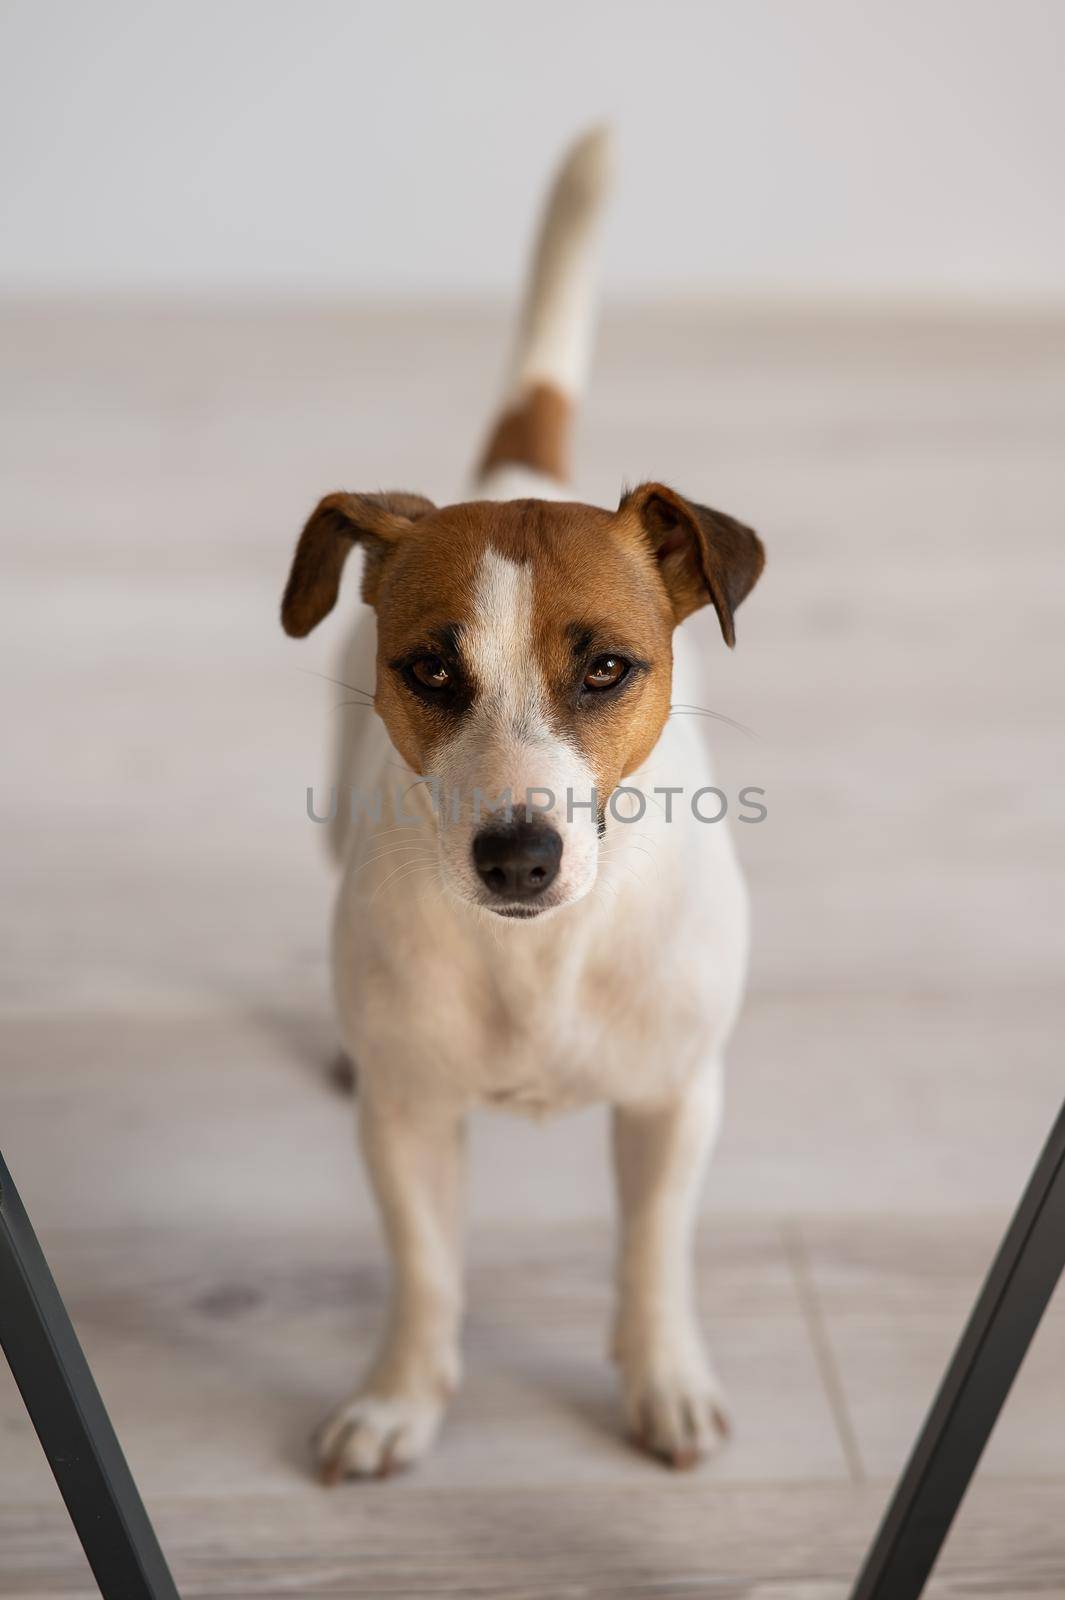 Jack russell terrier dog on a wooden floor. by mrwed54